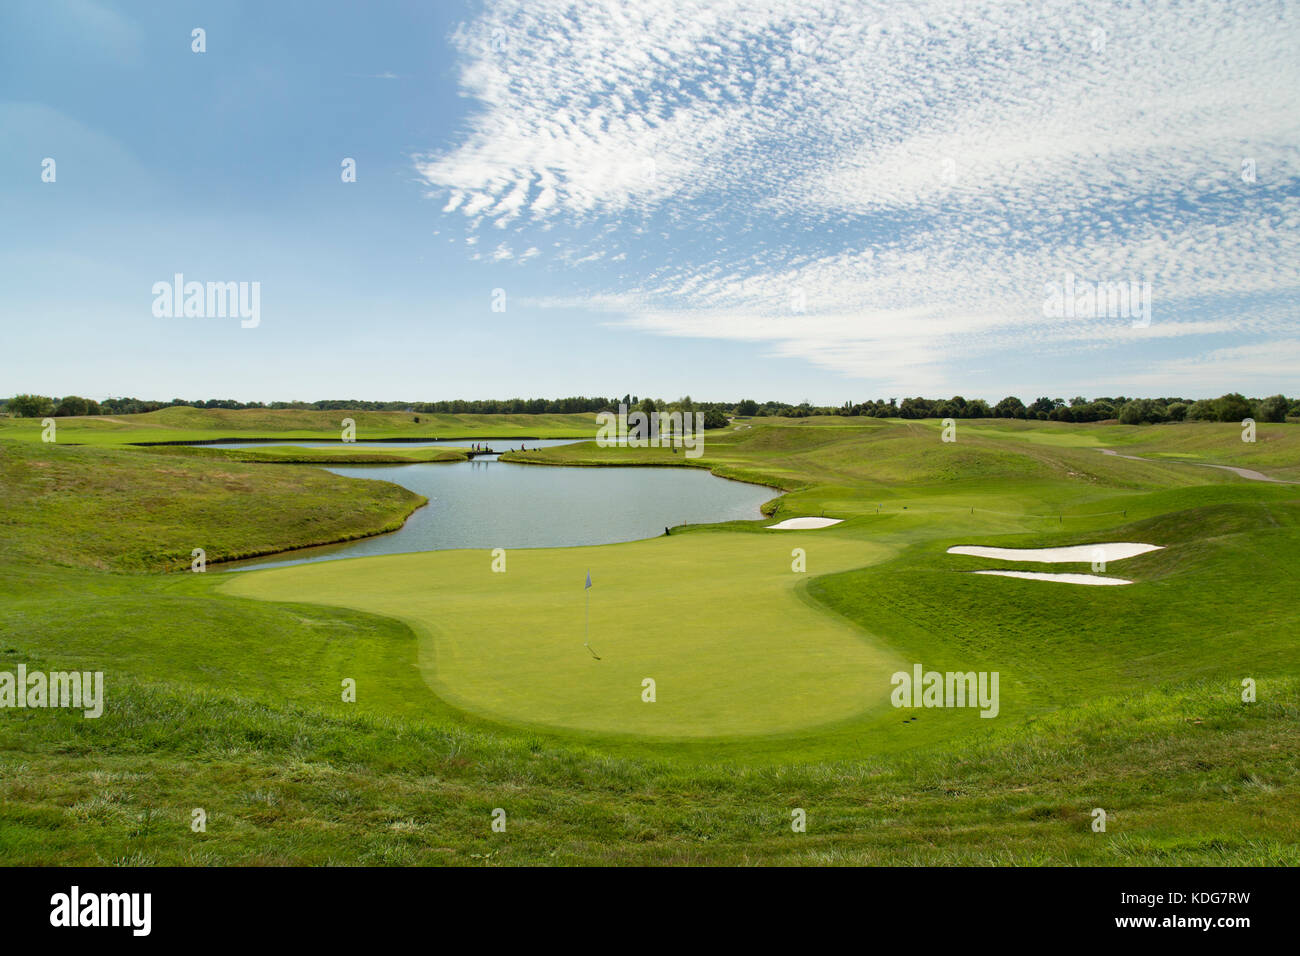 La Ryder Cup Flags & Buggy 2018 Foto Stock